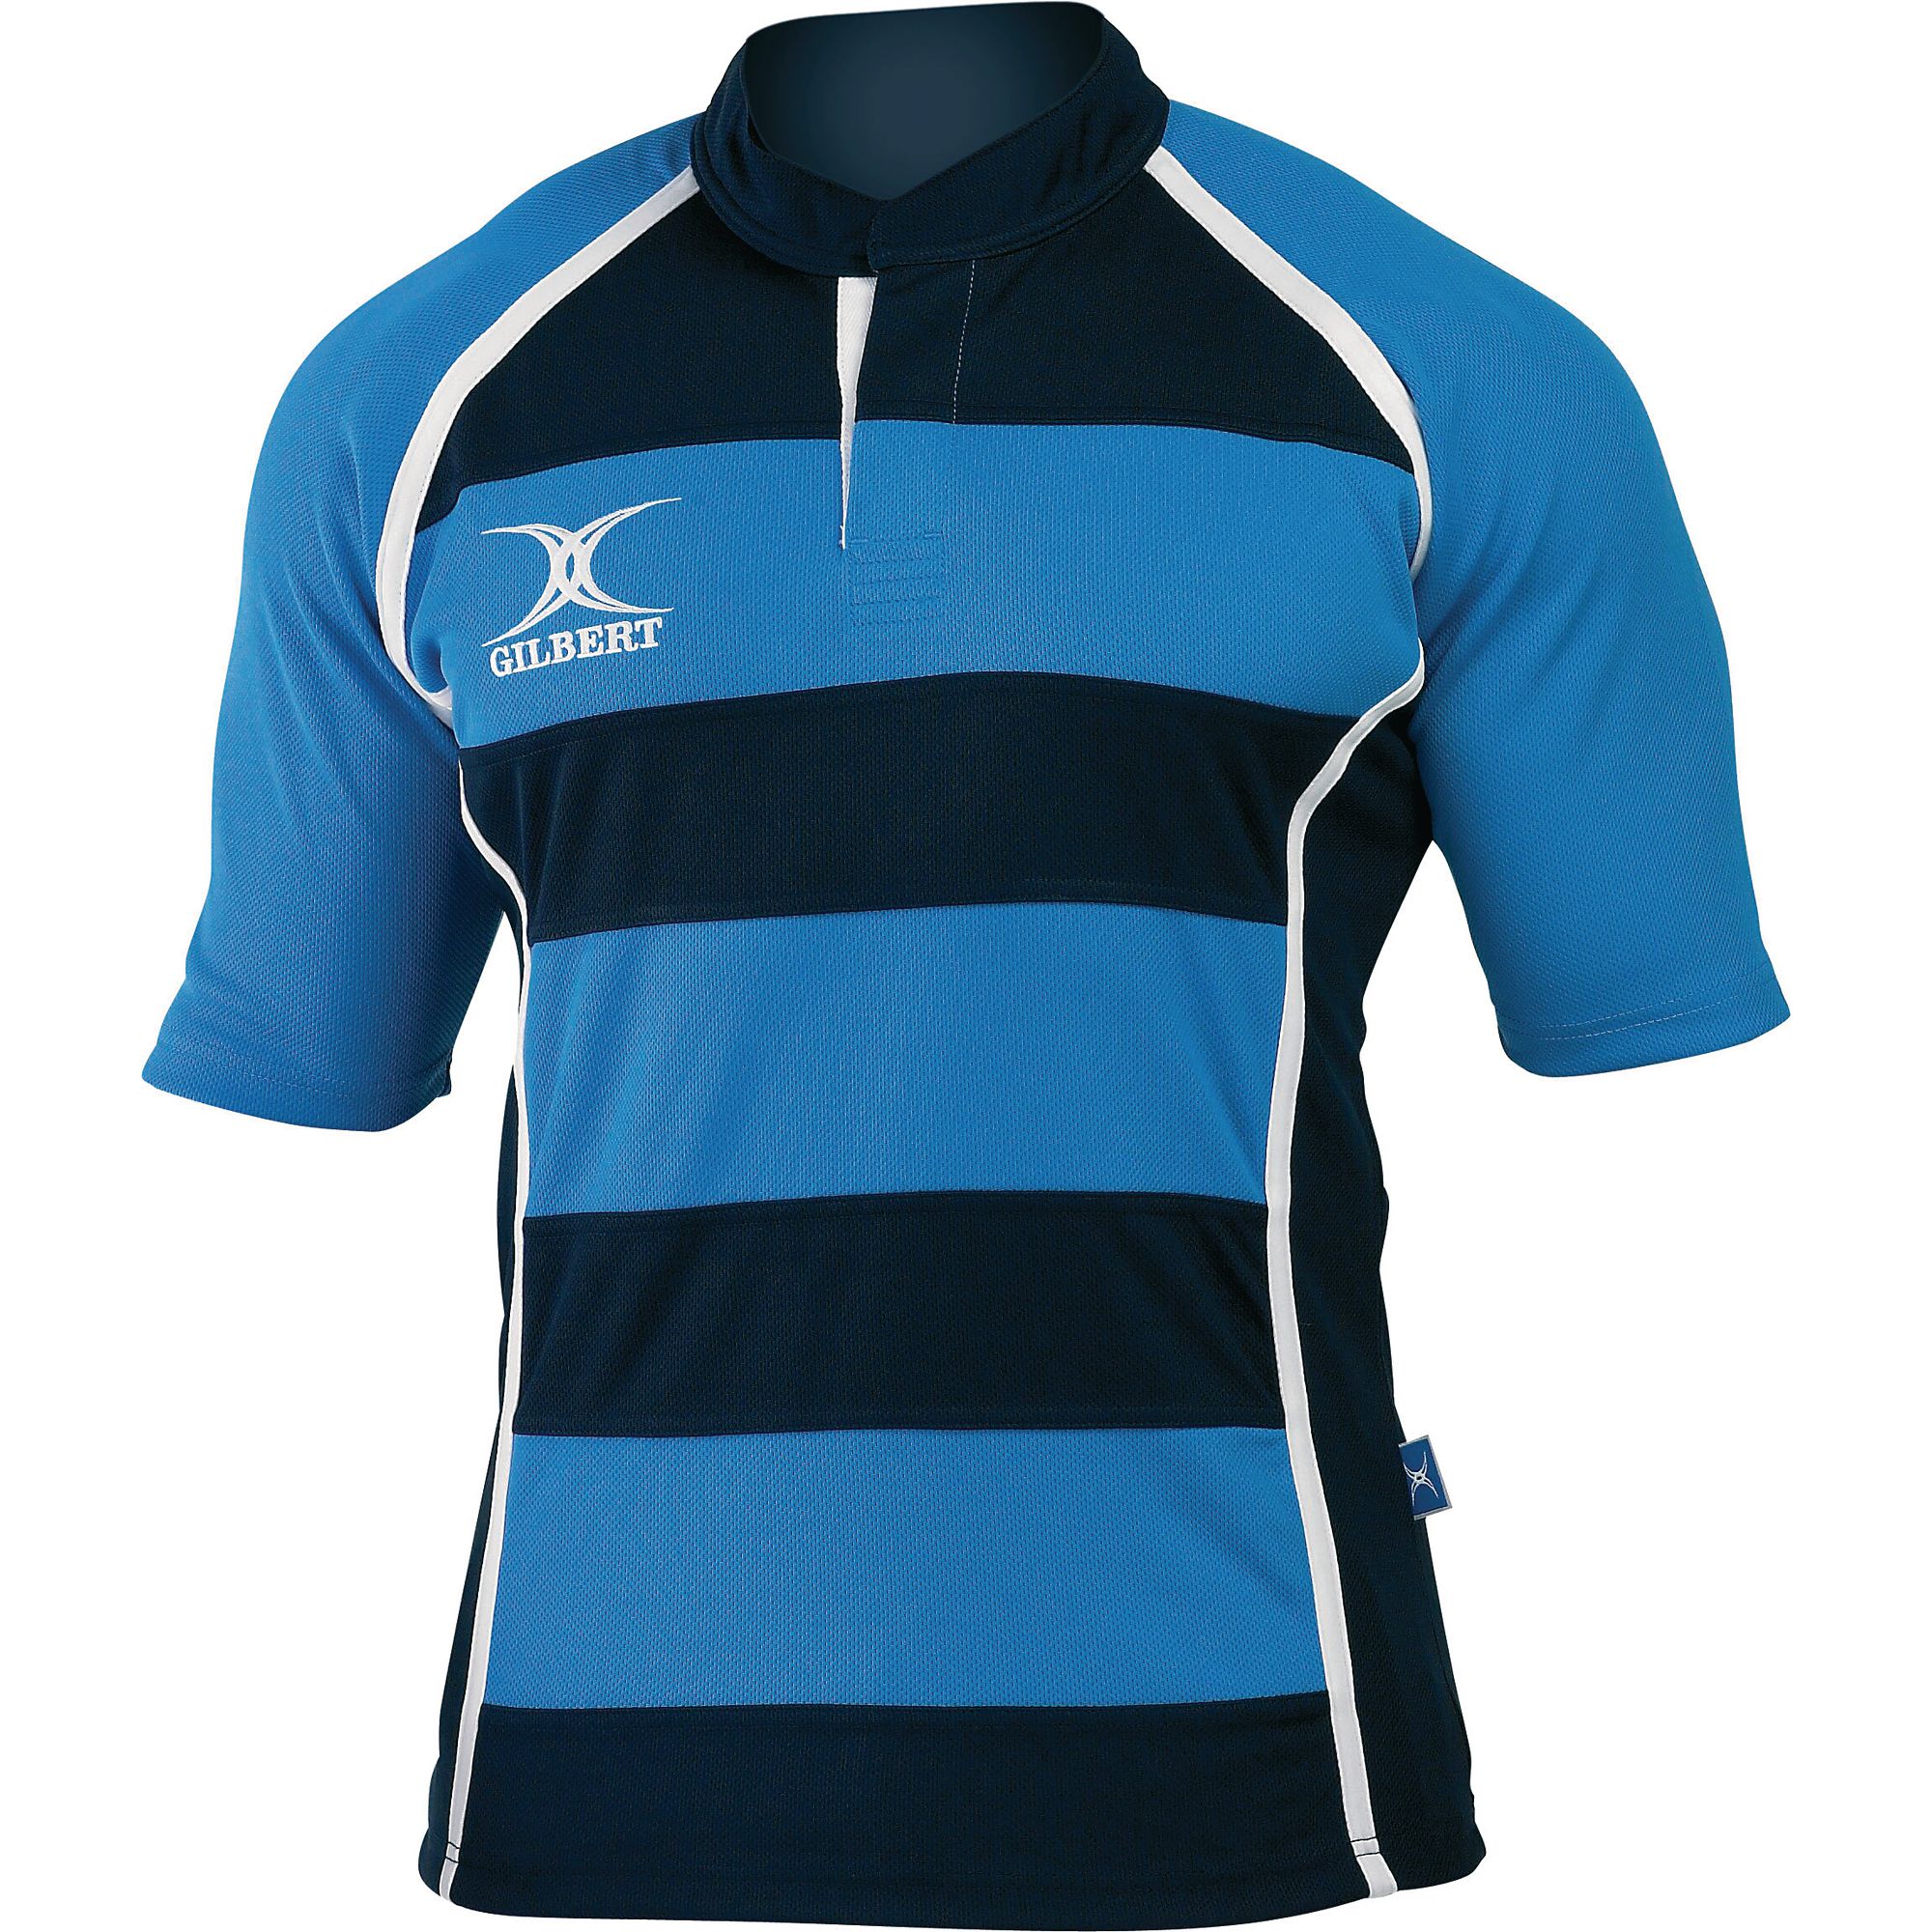 hooped rugby shirt